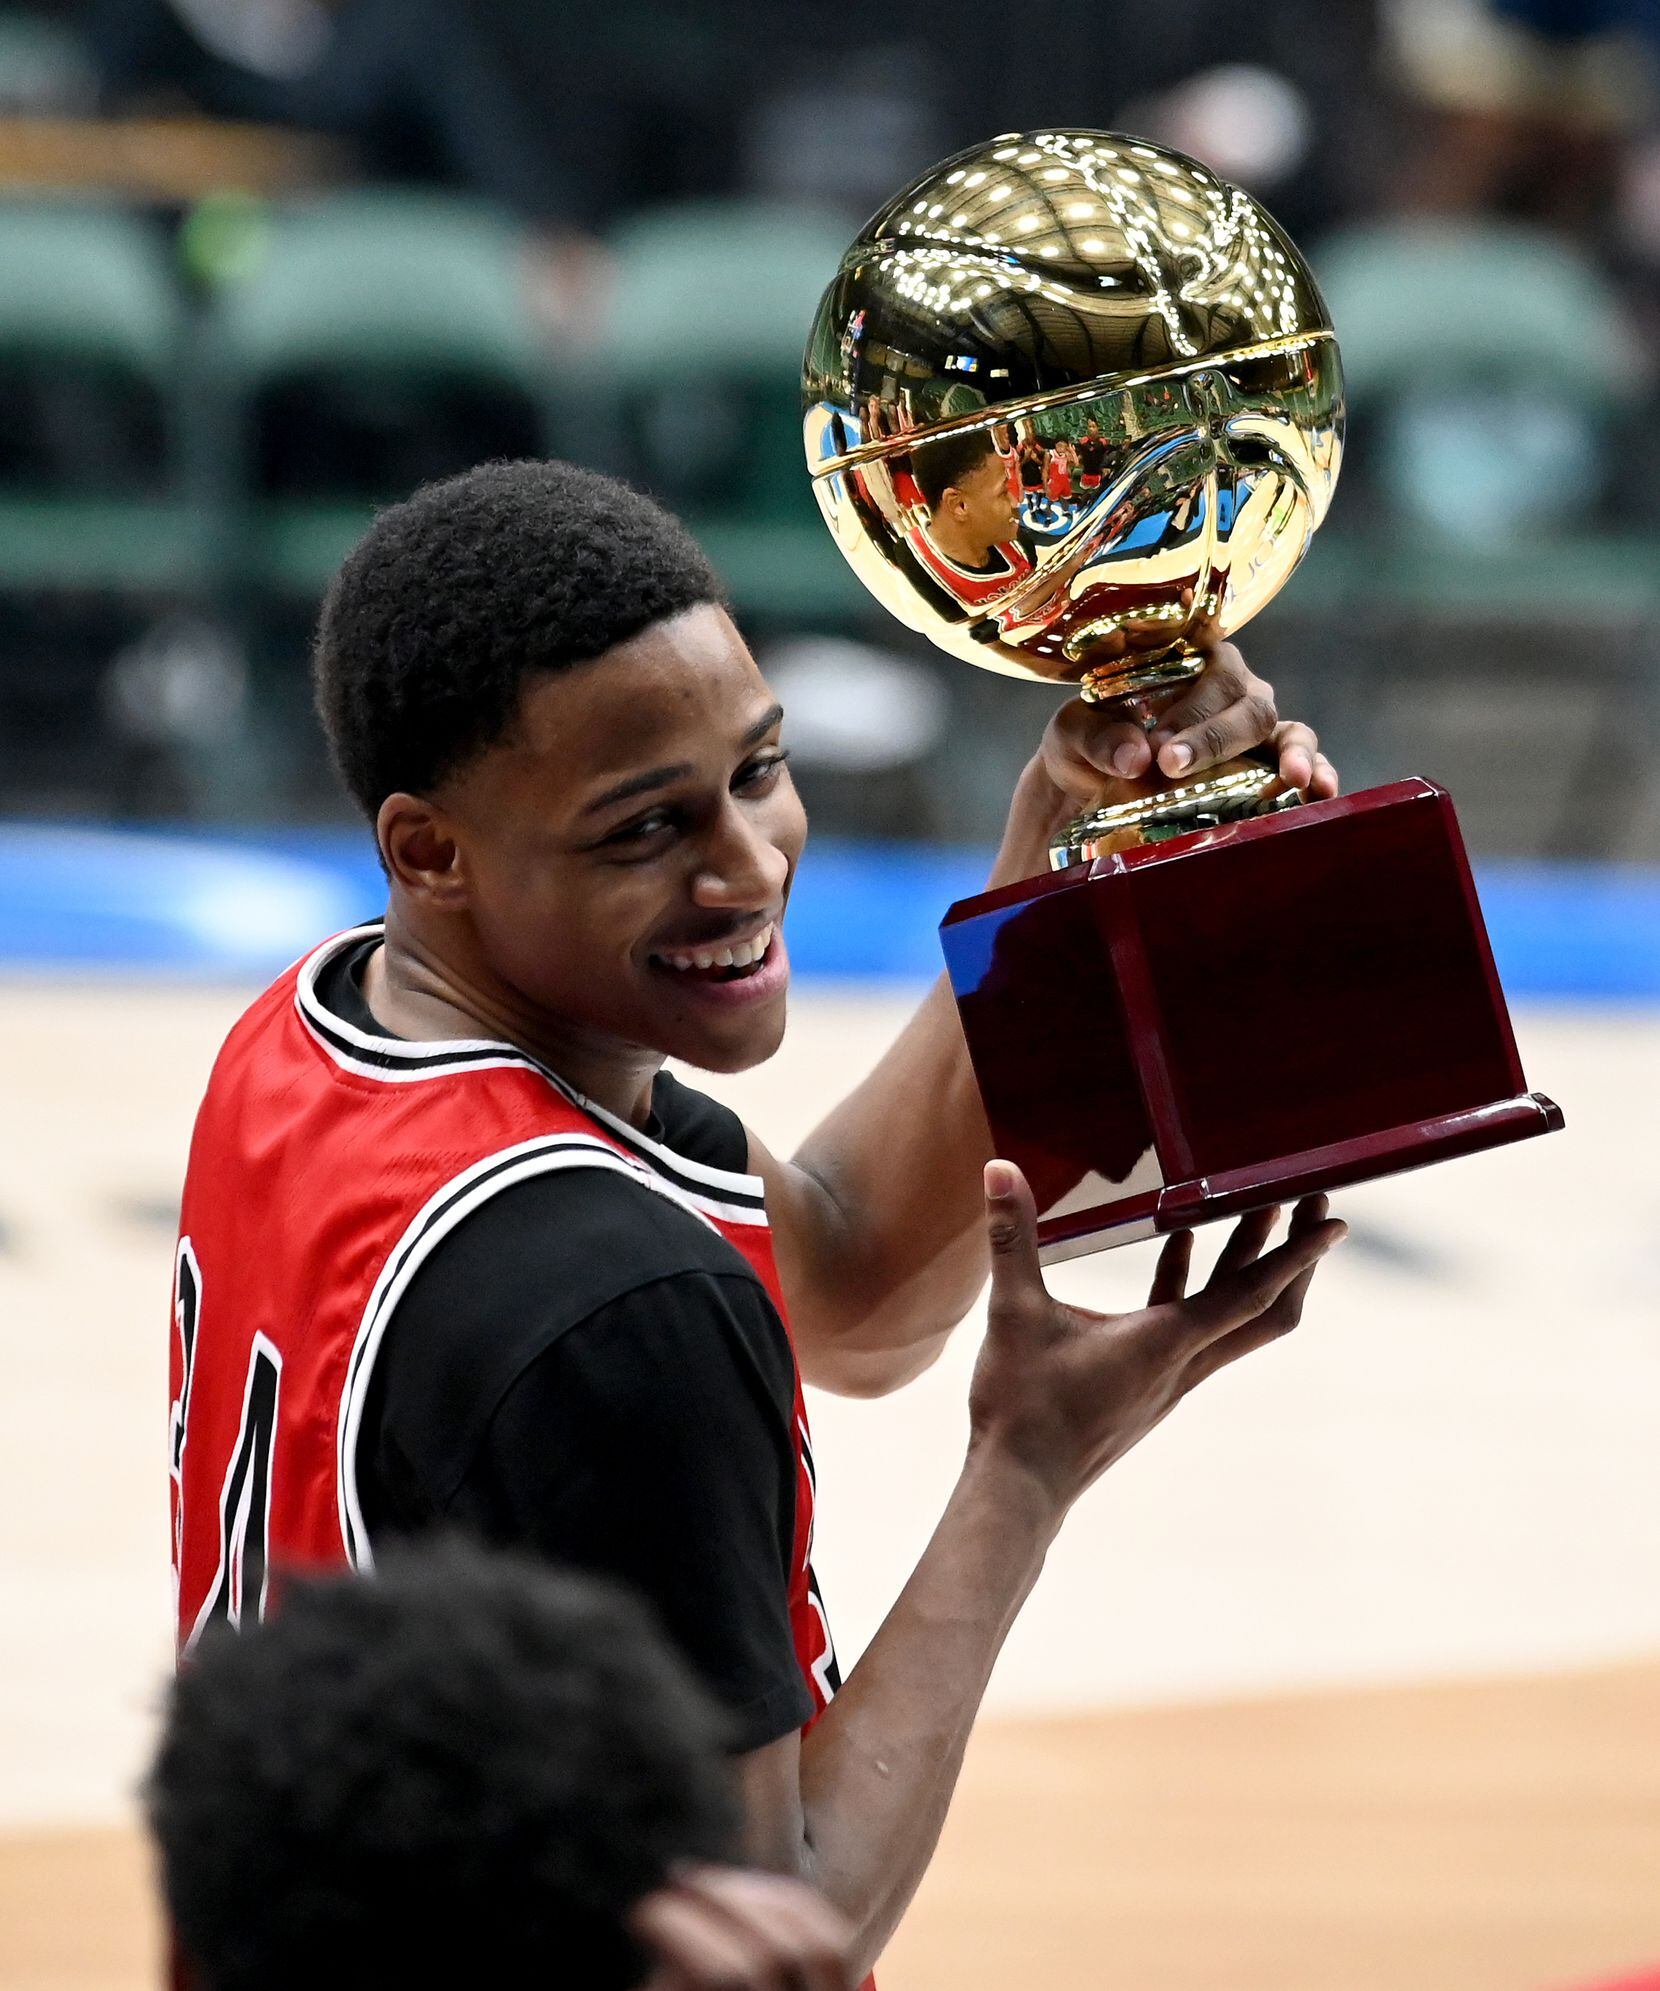 Mansfield Legacy’s Jaxon Miles holds up the championship trophy after Silver championship of the Dallas Mavericks Fall Classic between Keller Central and Mansfield Legacy, Tuesday, Nov. 23, 2021, in Frisco, Texas. (Matt Strasen/Special Contributor)